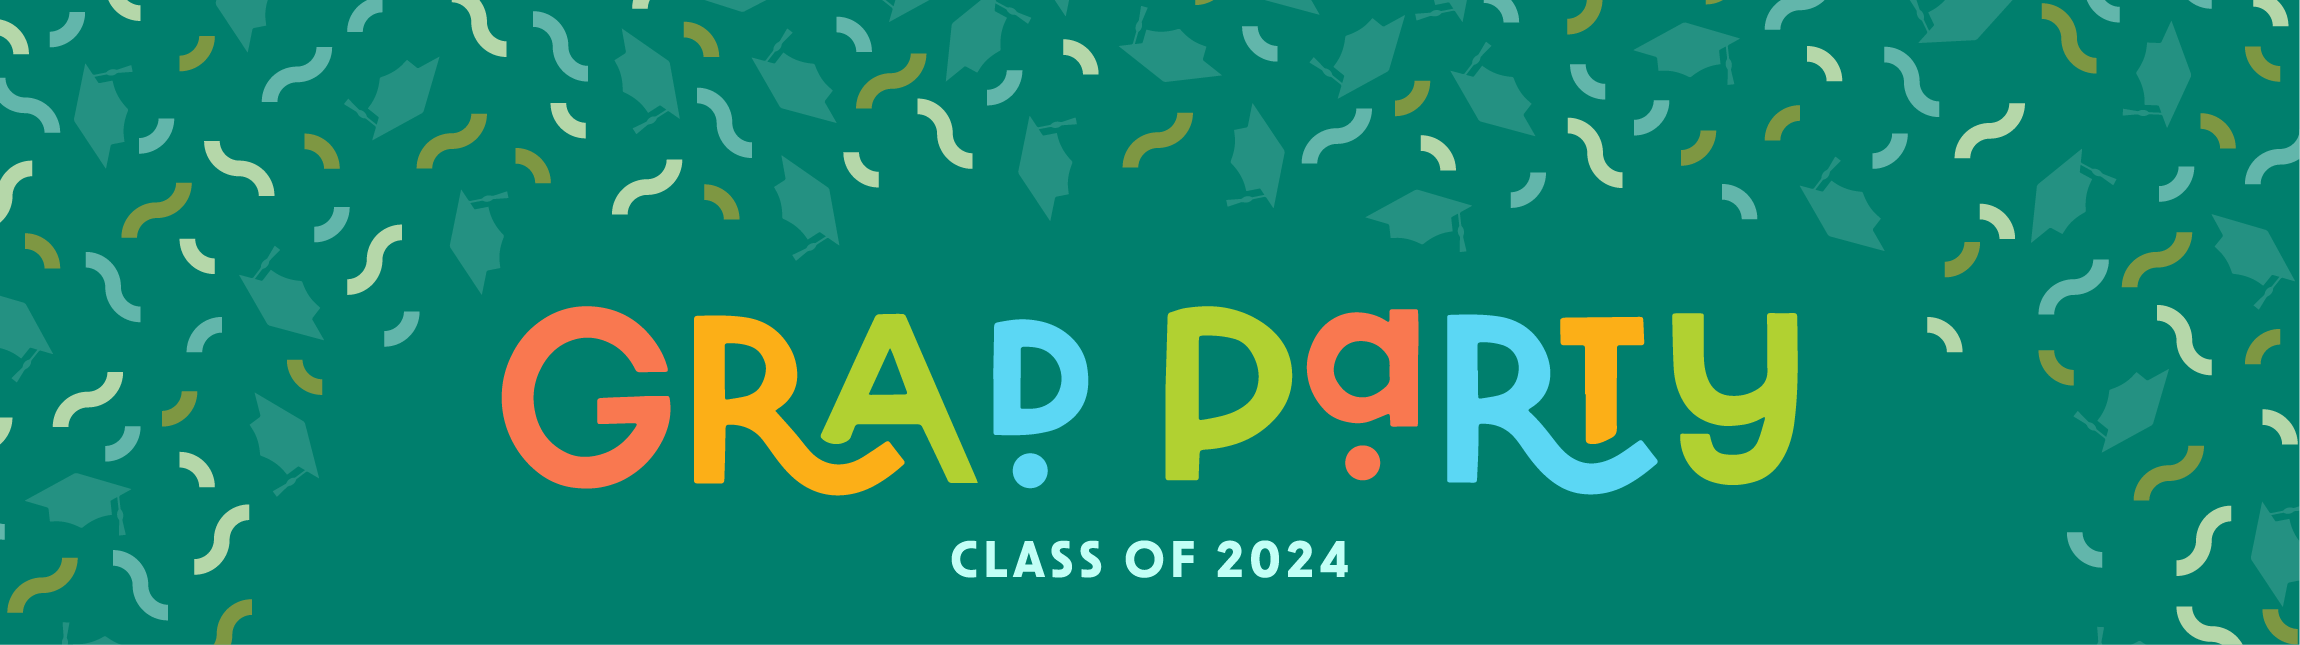 Grad Party Class of 2024 header image